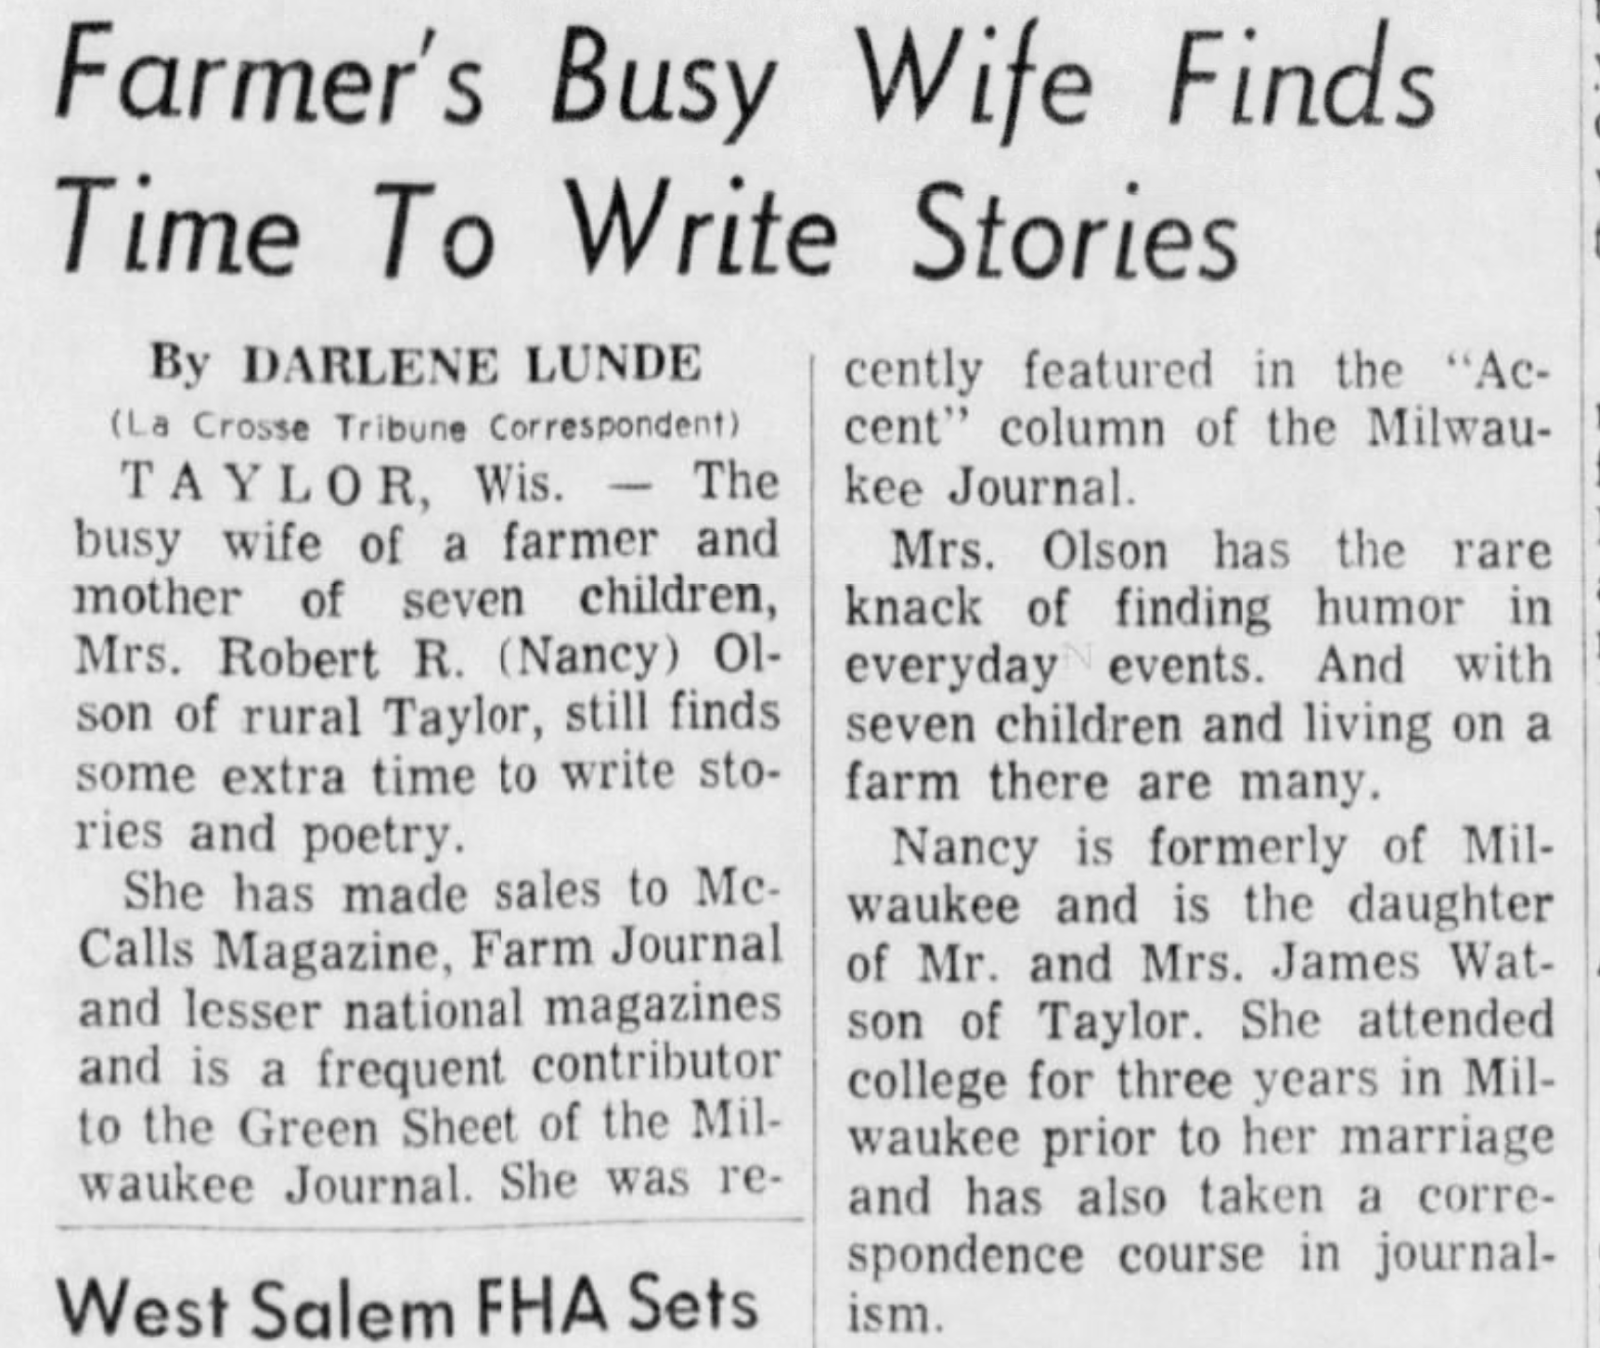 "Farmer's Busy Wife Finds Time To Write Stories"